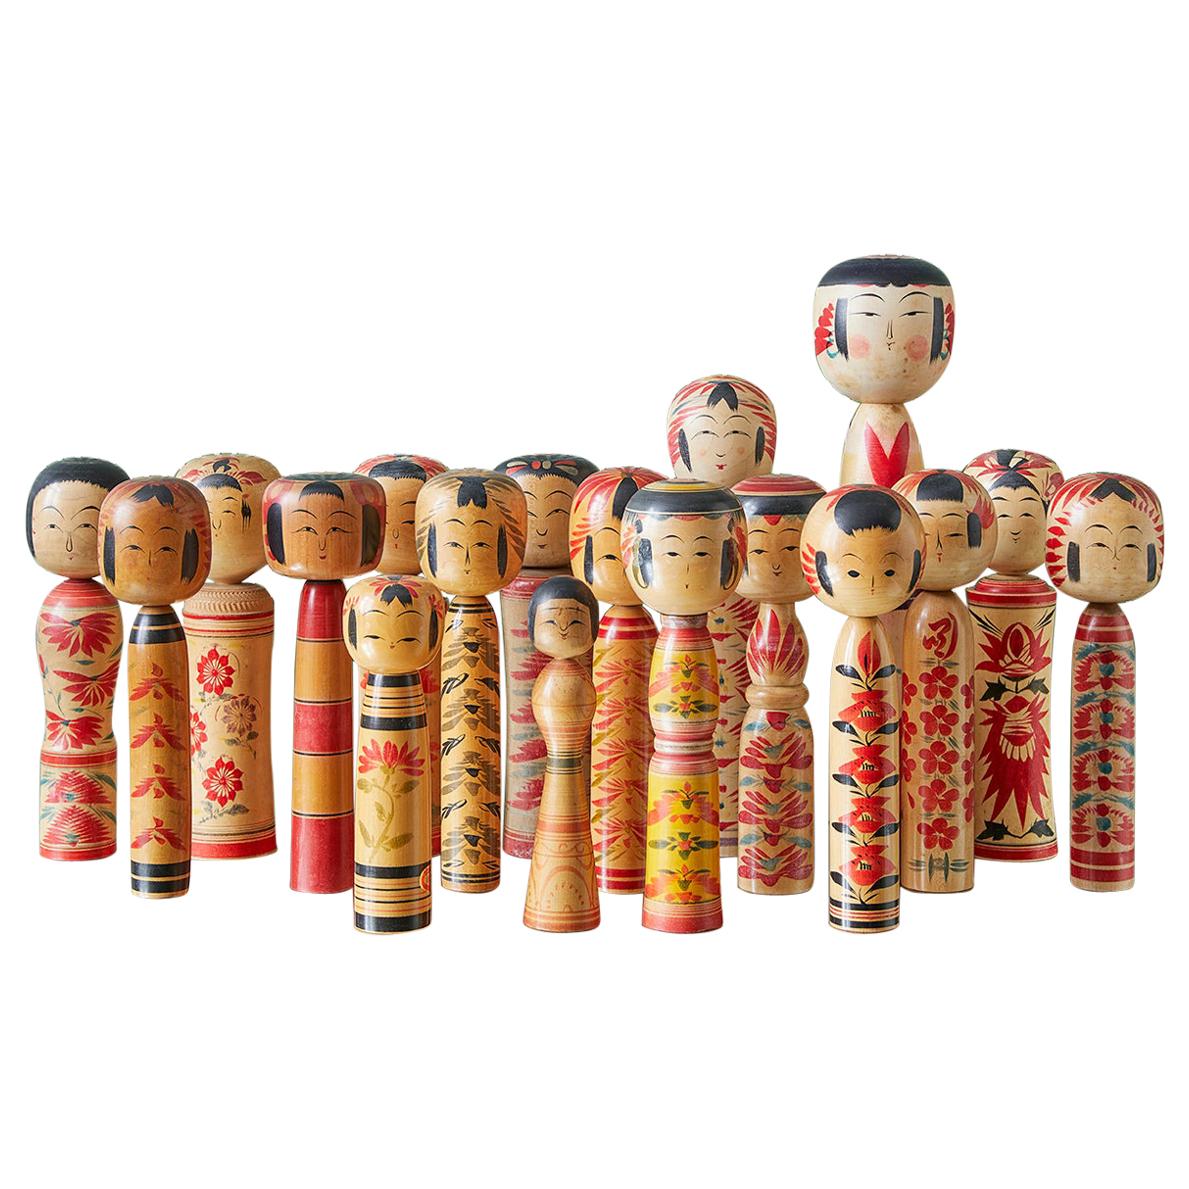 Vintage Japanese 1960s-1980s Collection of 18 Kokeshi Dolls from Tohoku Region